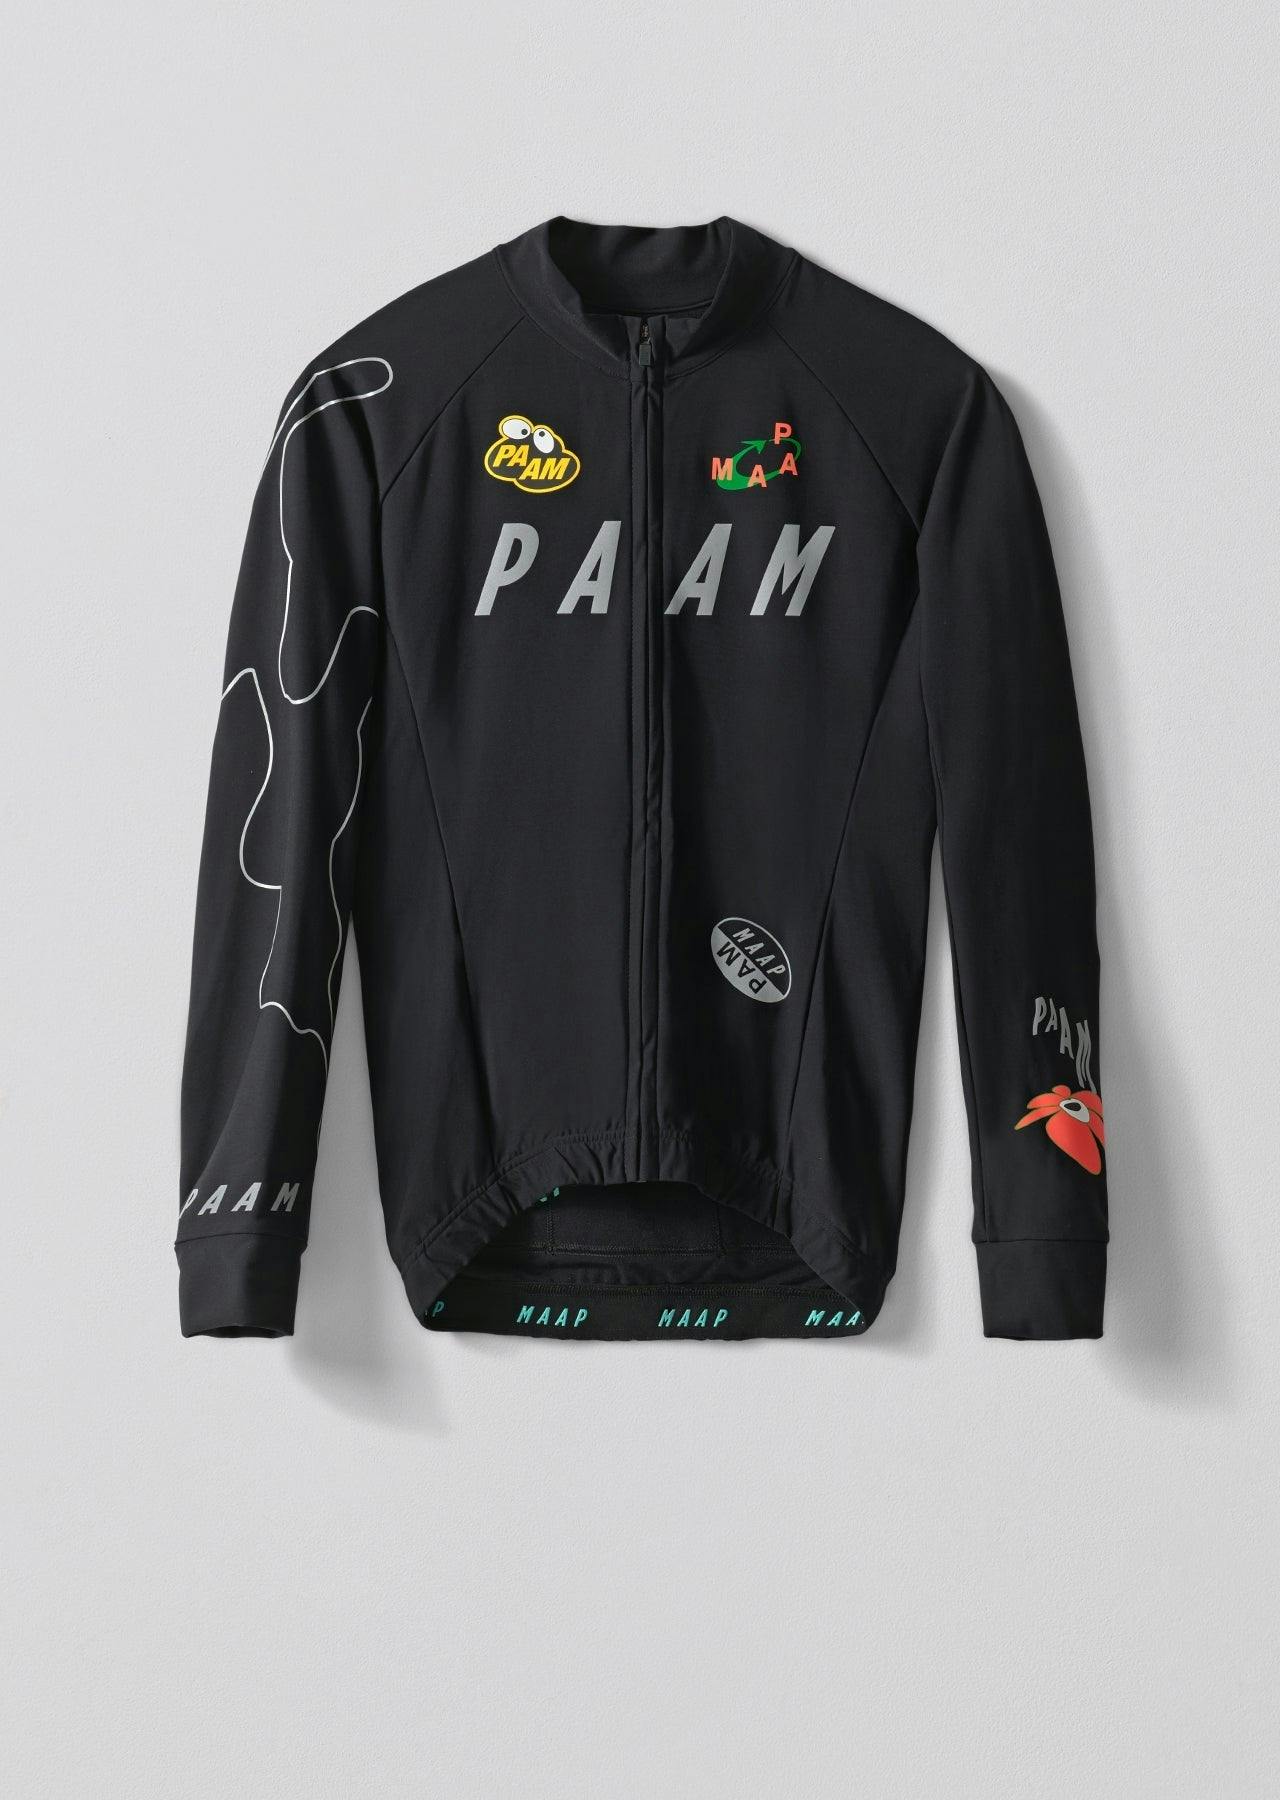 MAAP x PAM Thermal LS Jersey